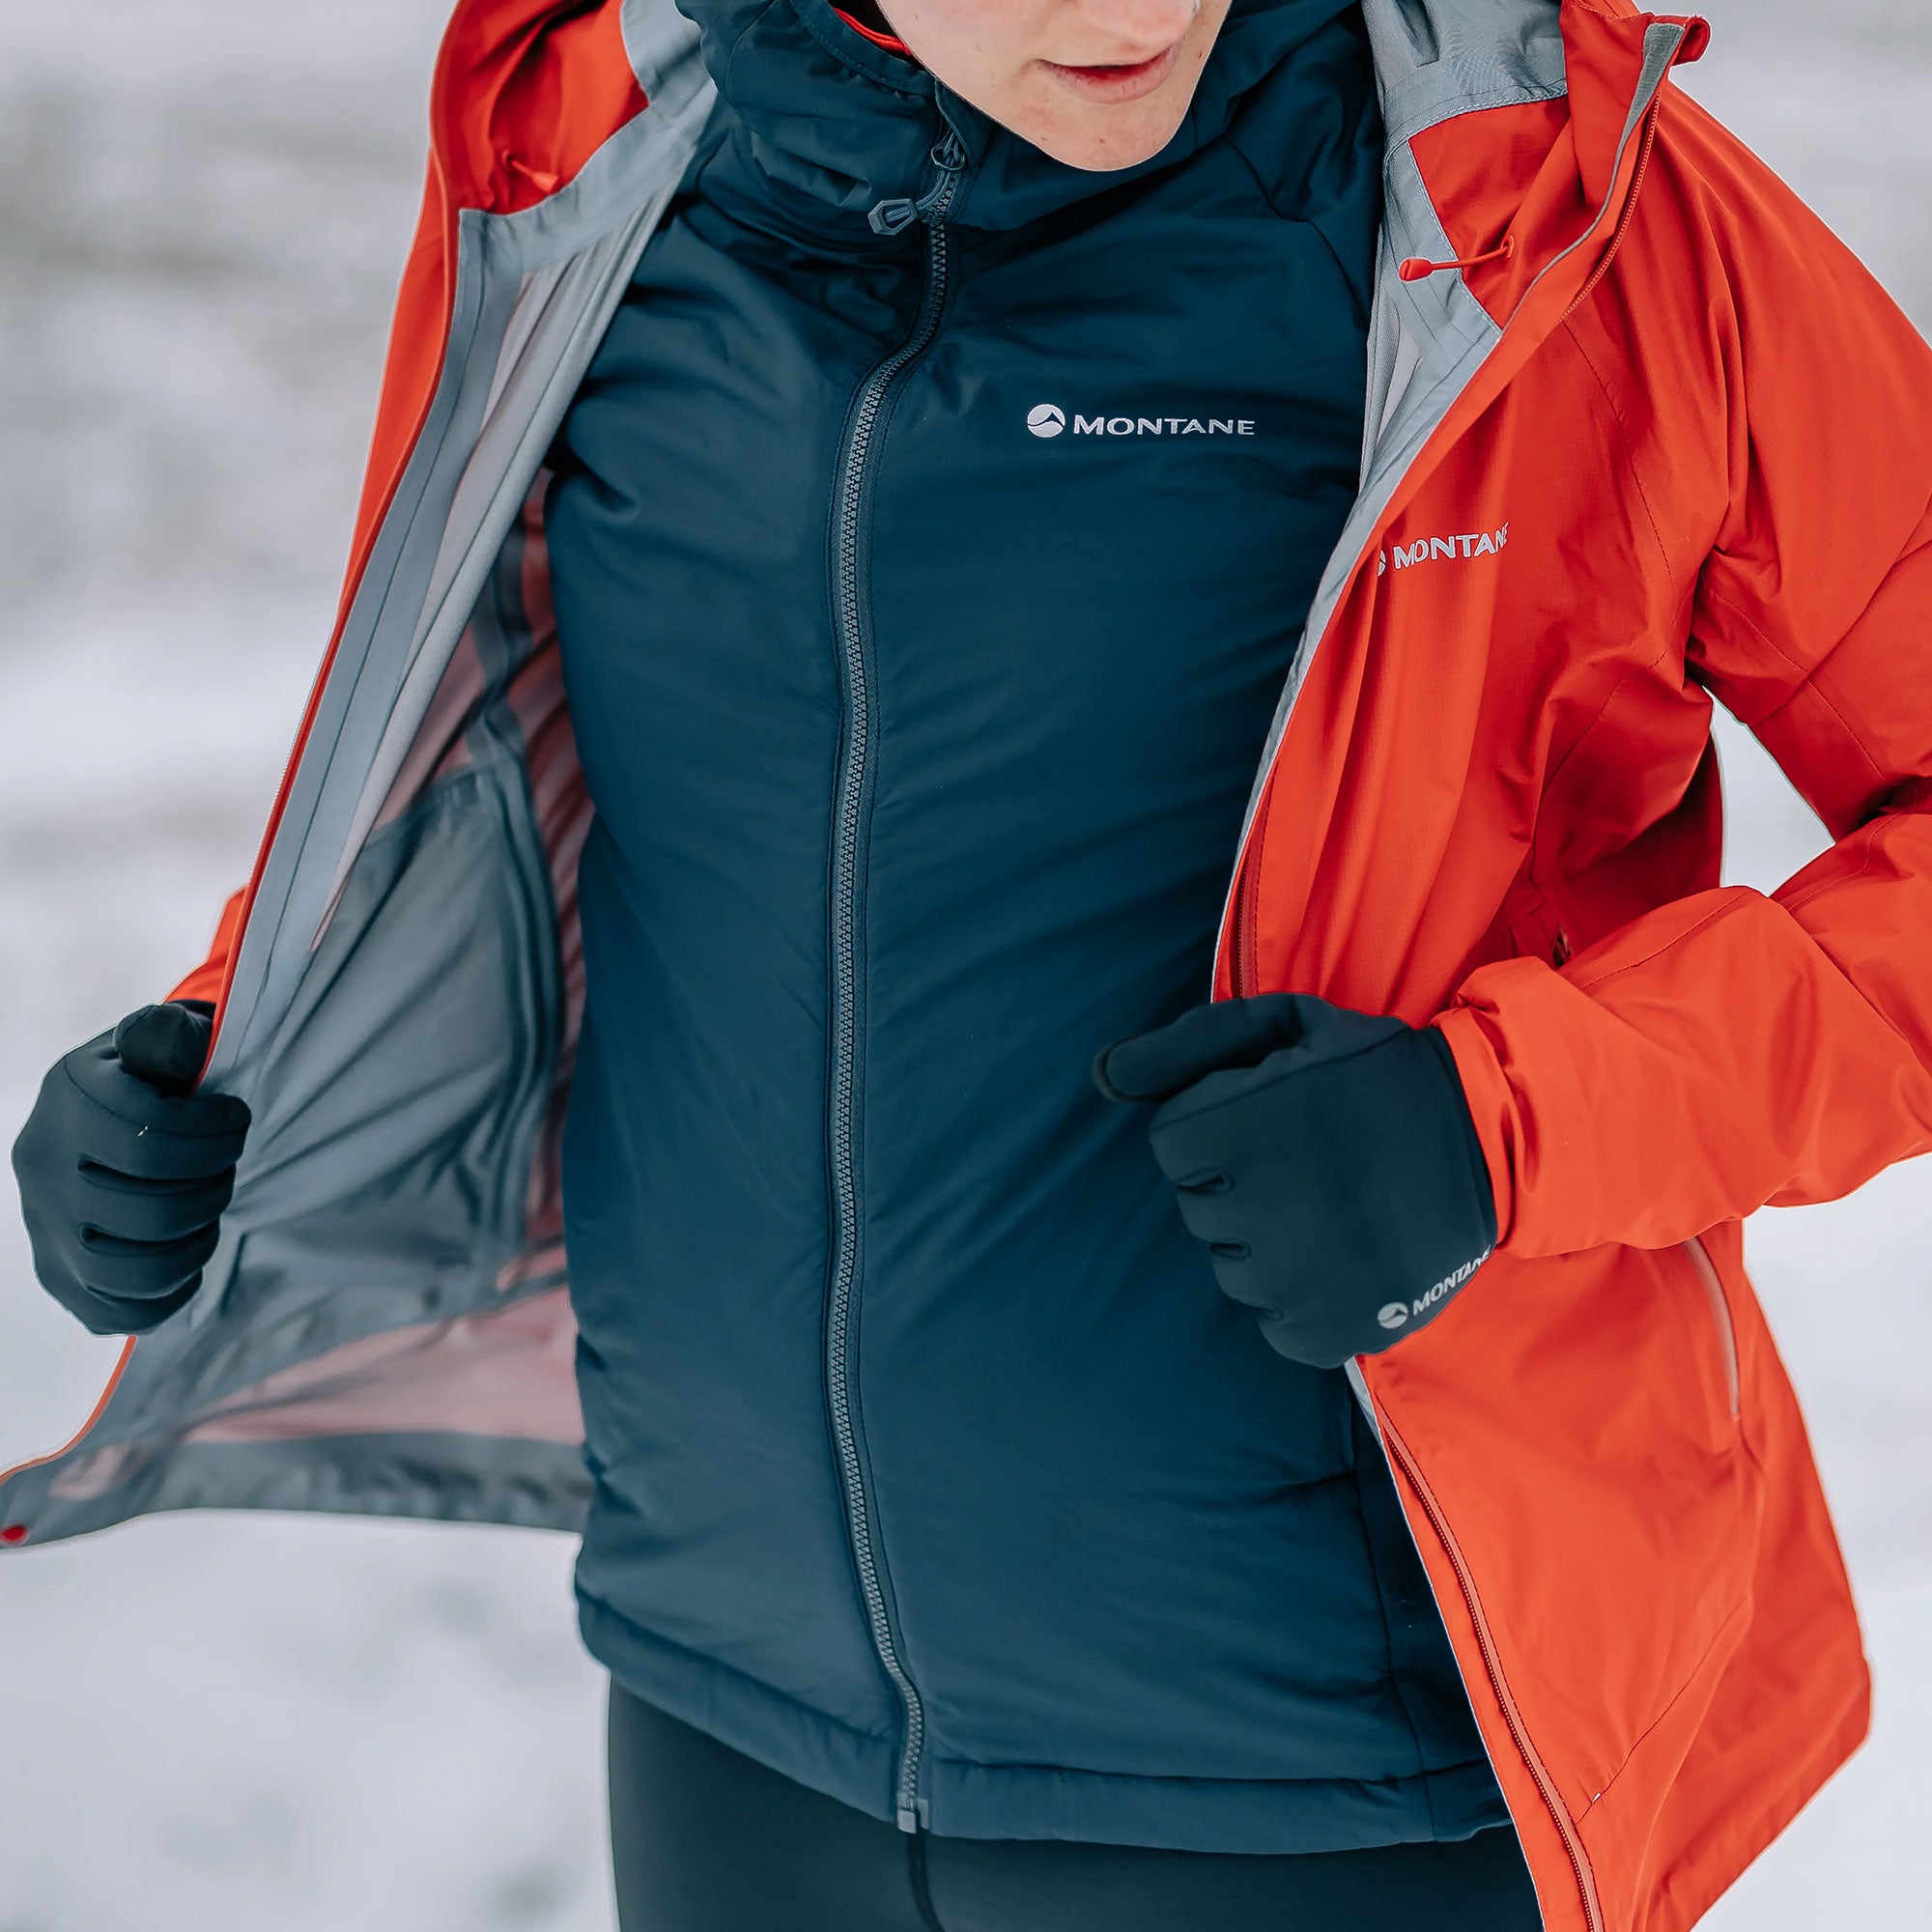 Women's Insulated Jackets  Waterproof, Warm and Comfortable Montane  Jackets – Montane - US